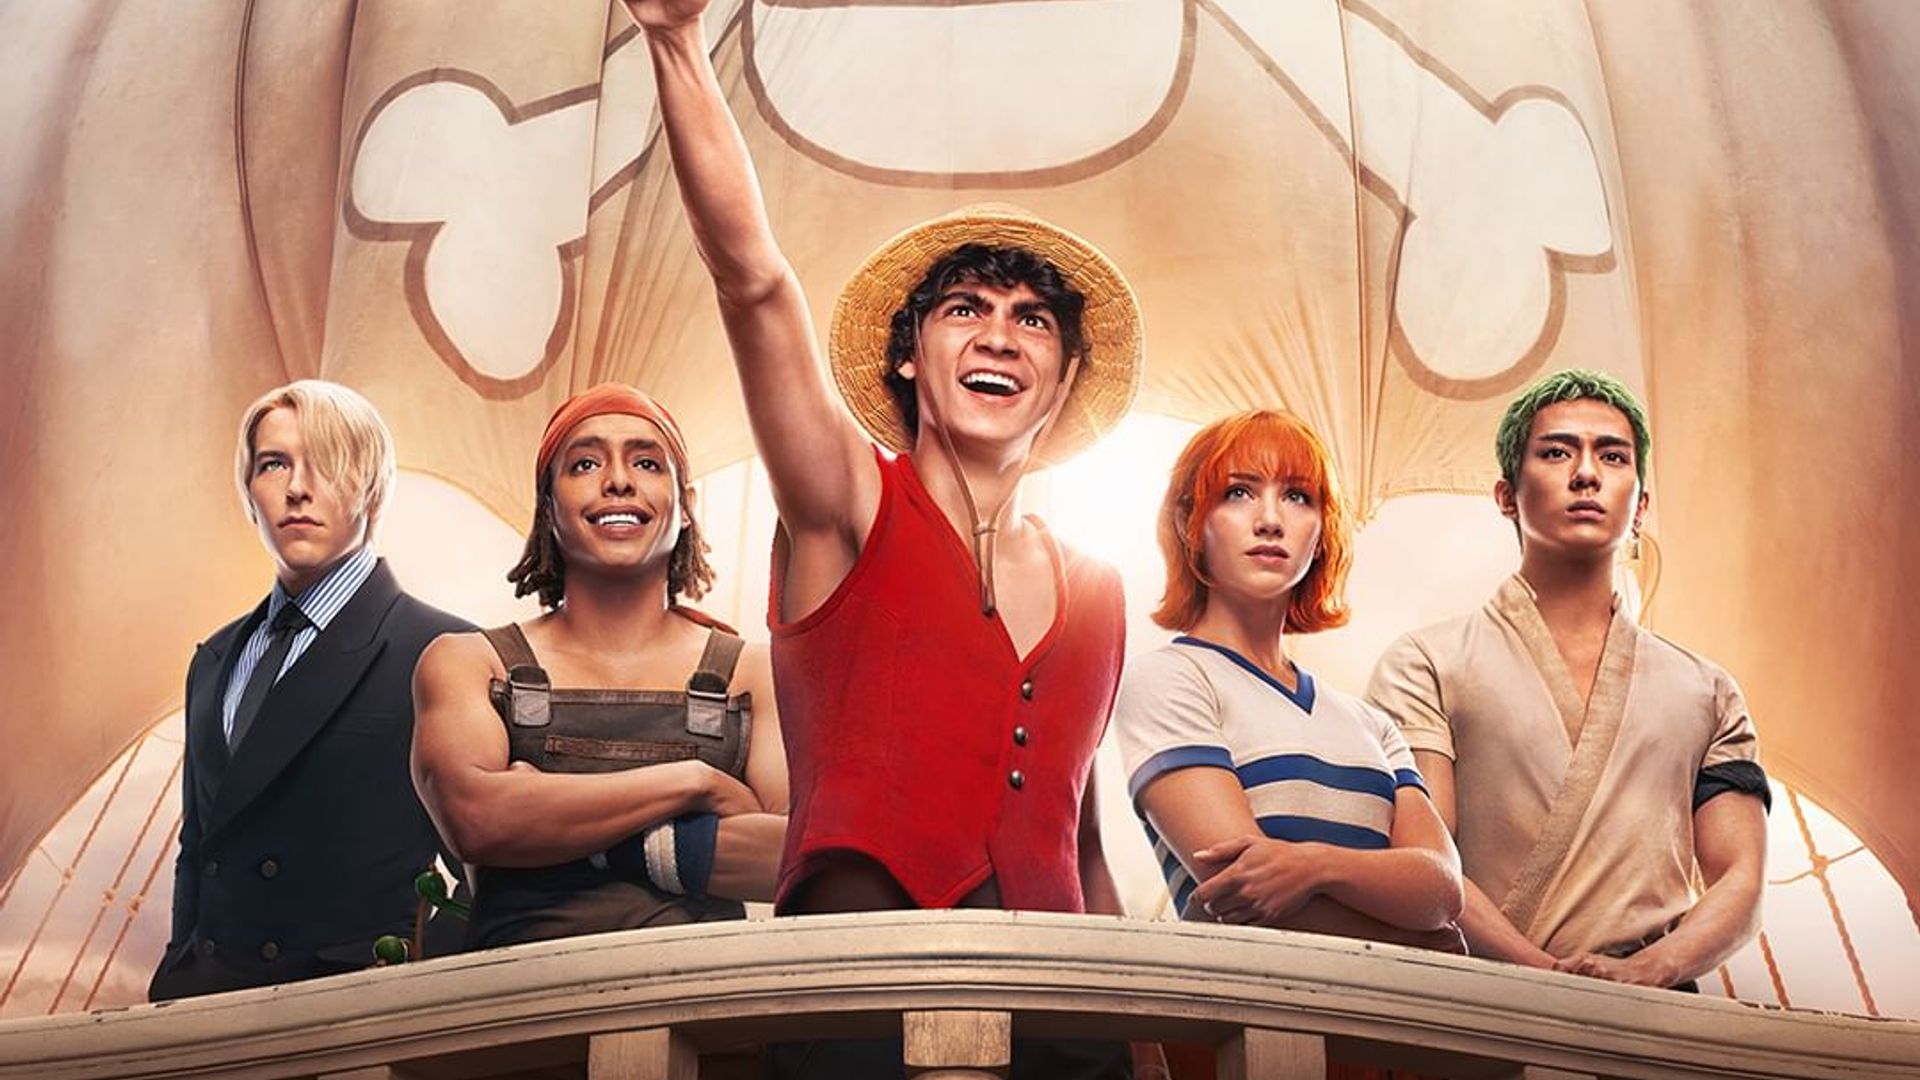 Netflix's 'One Piece' – Find Out Which Cast Member Gained the Most Instagram  Followers Since the Show Premiered!